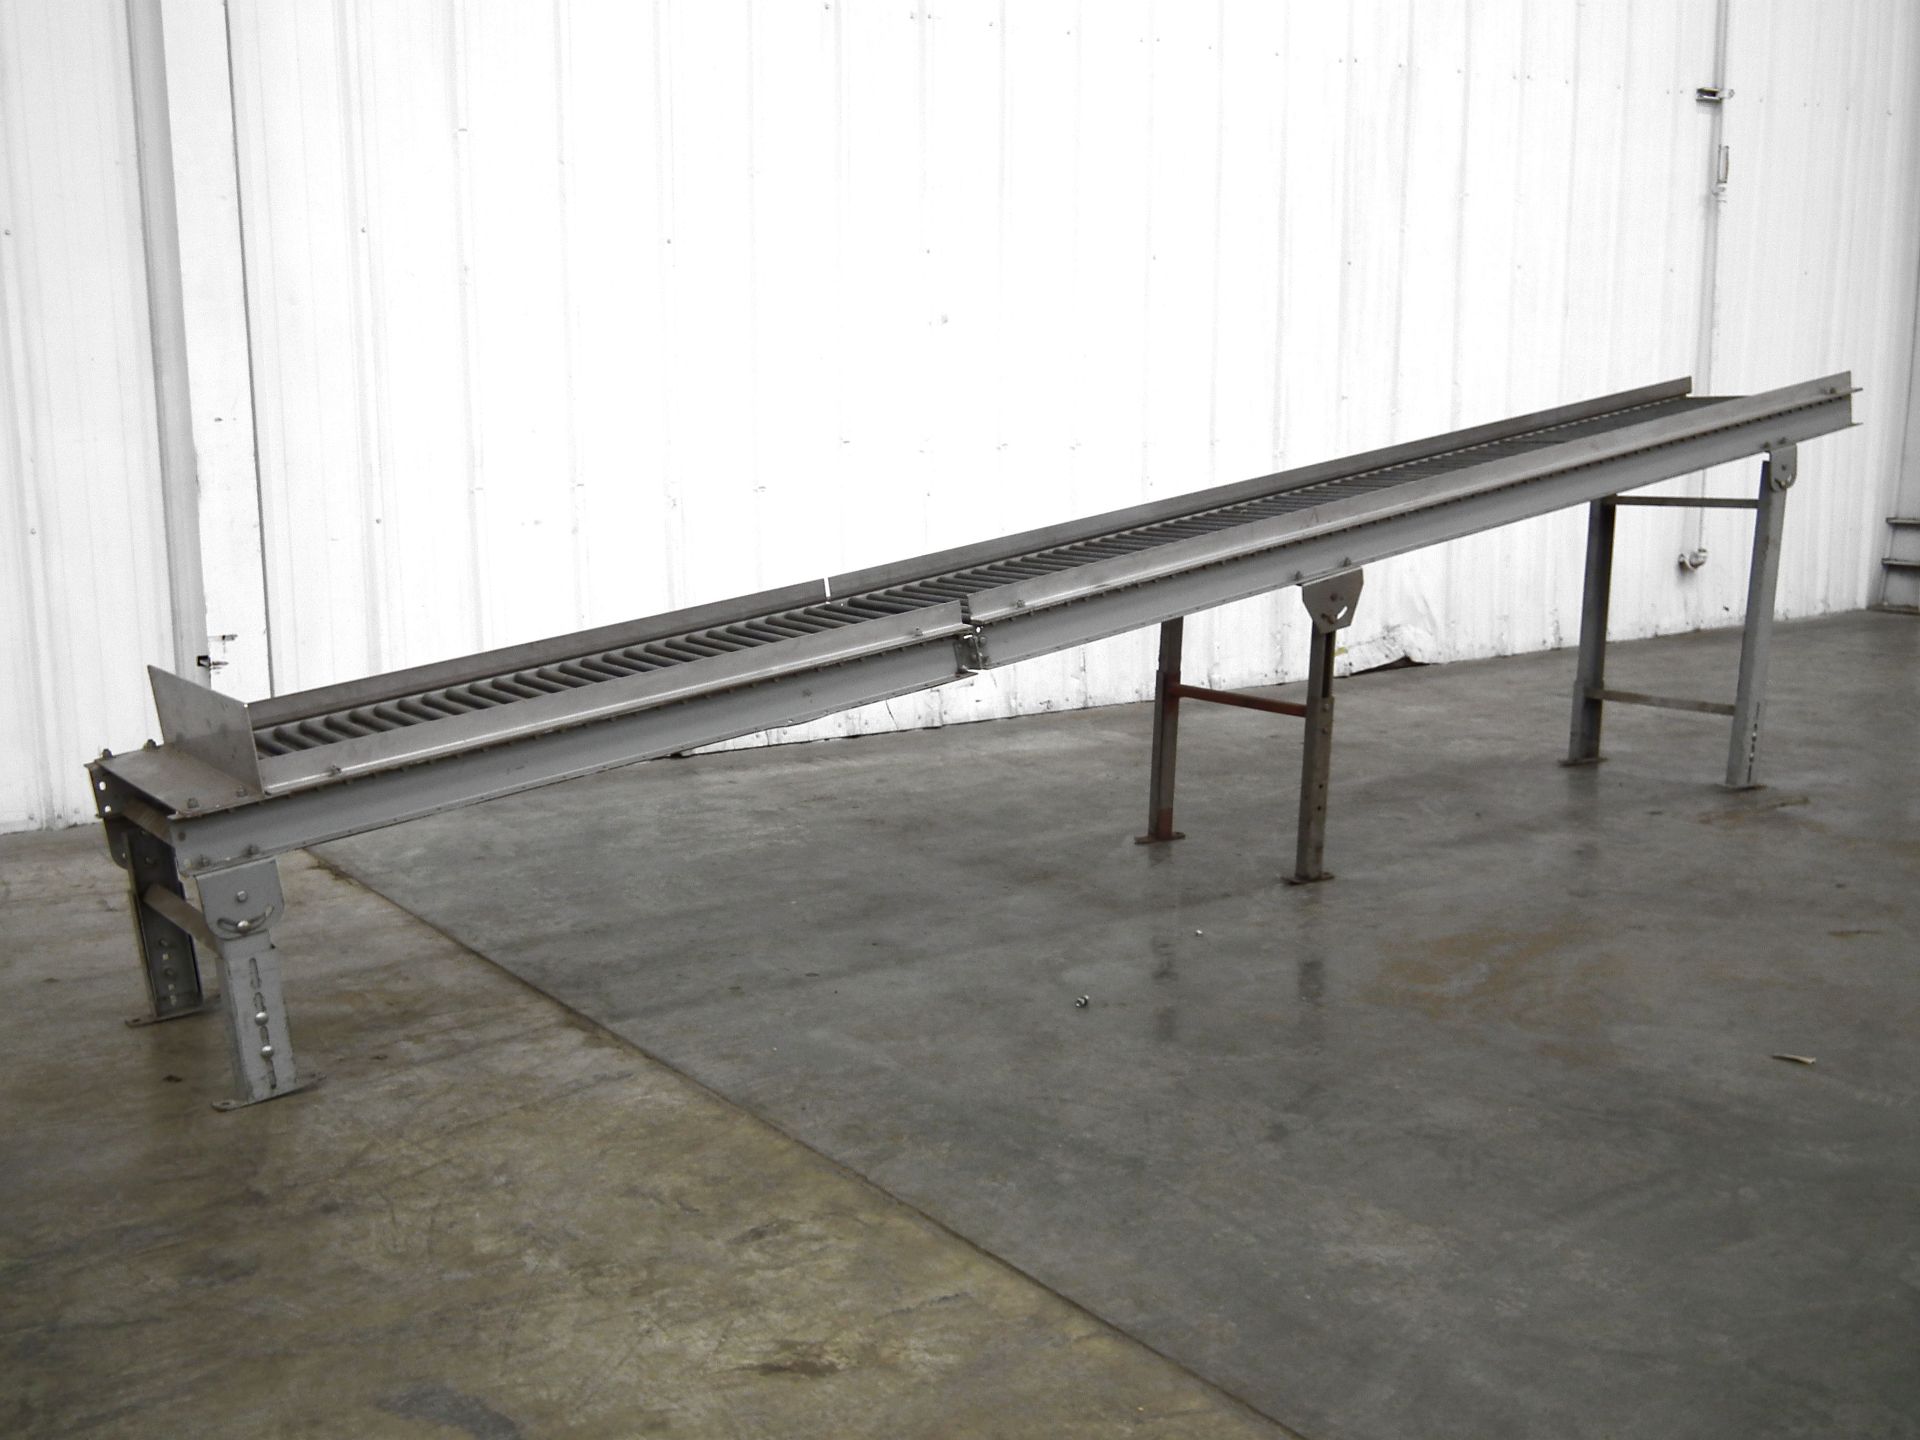 20 Inch Wide x 173 Inches Long Gravity Conveyor B3685 - Image 2 of 6